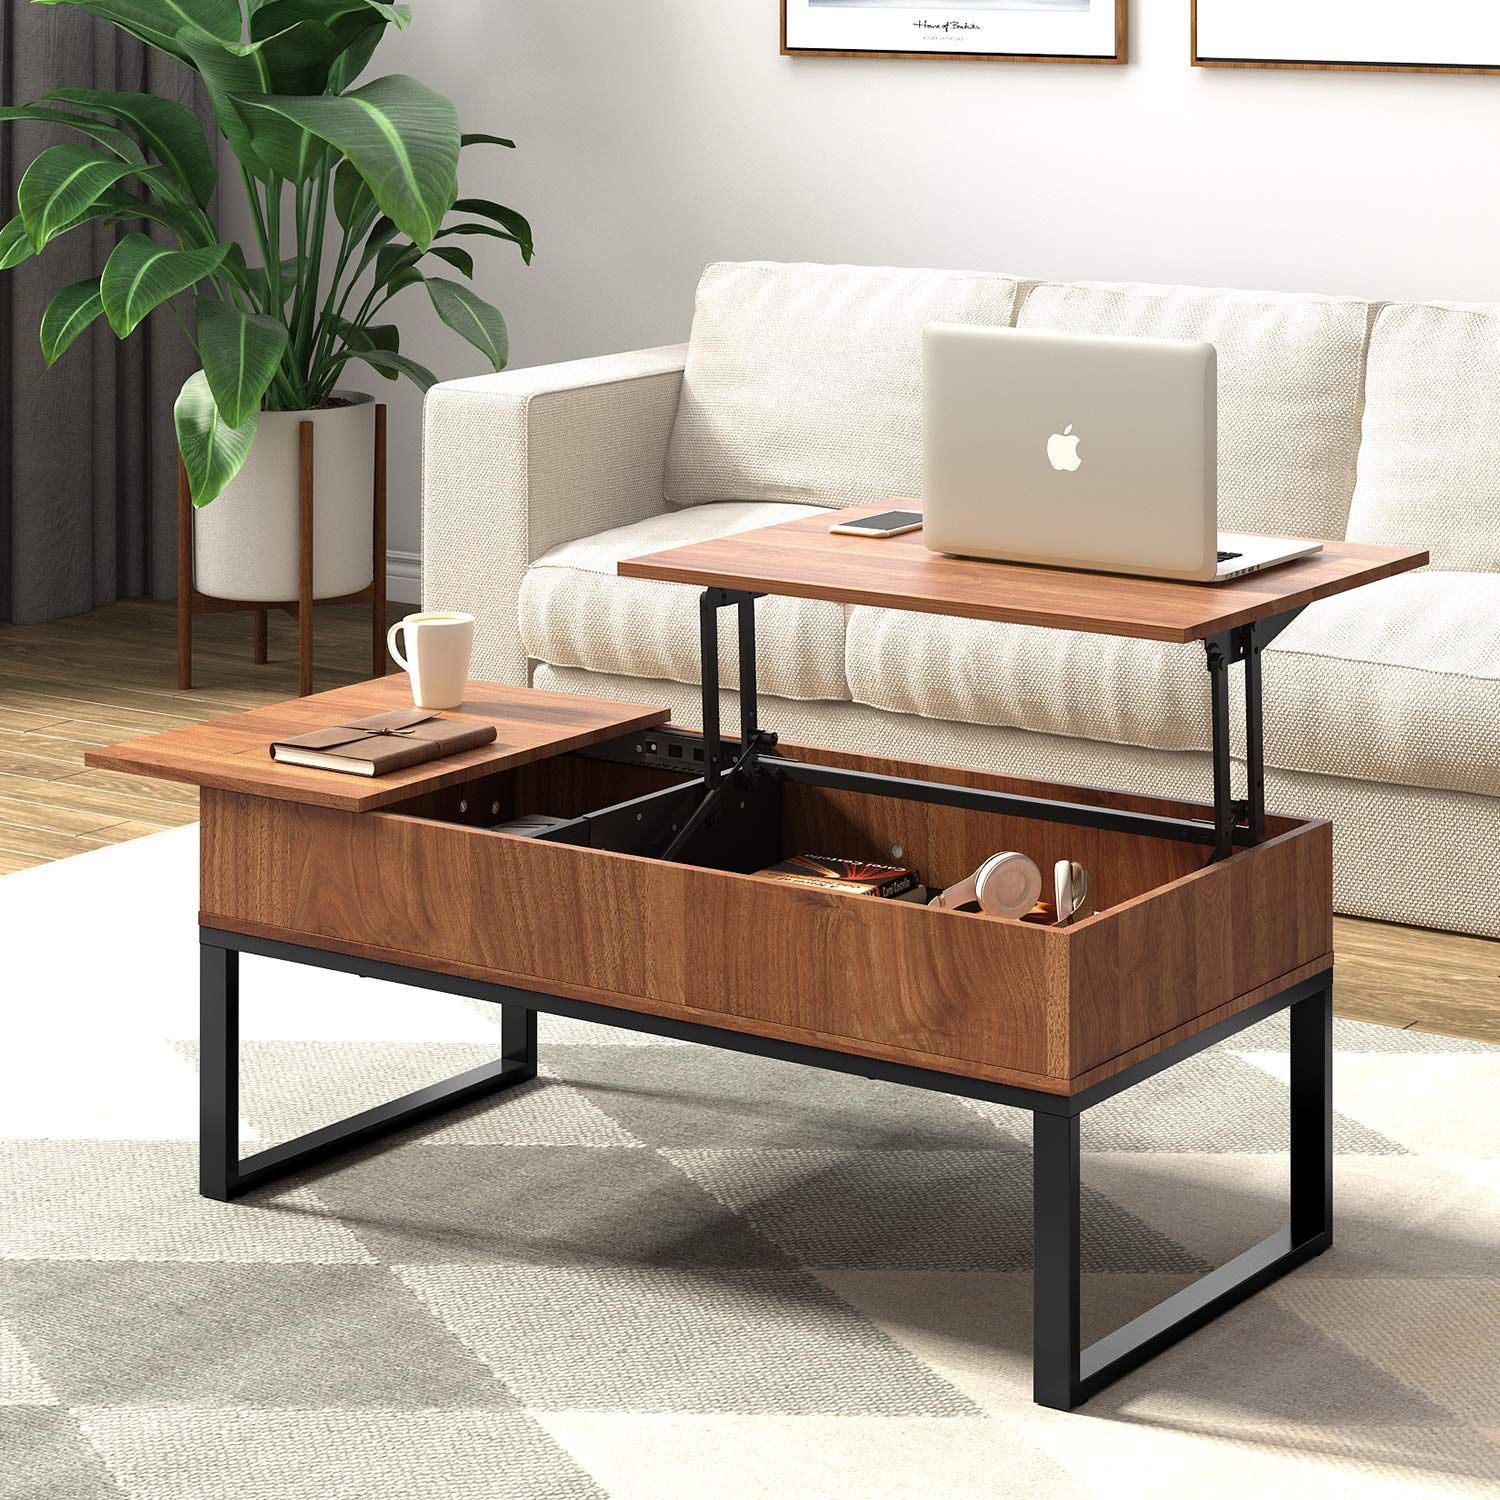 Wlive Wood Coffee Table With Adjustable Lift Top Table, Metal Frame Intended For Coffee Tables With Hidden Compartments (View 17 of 20)